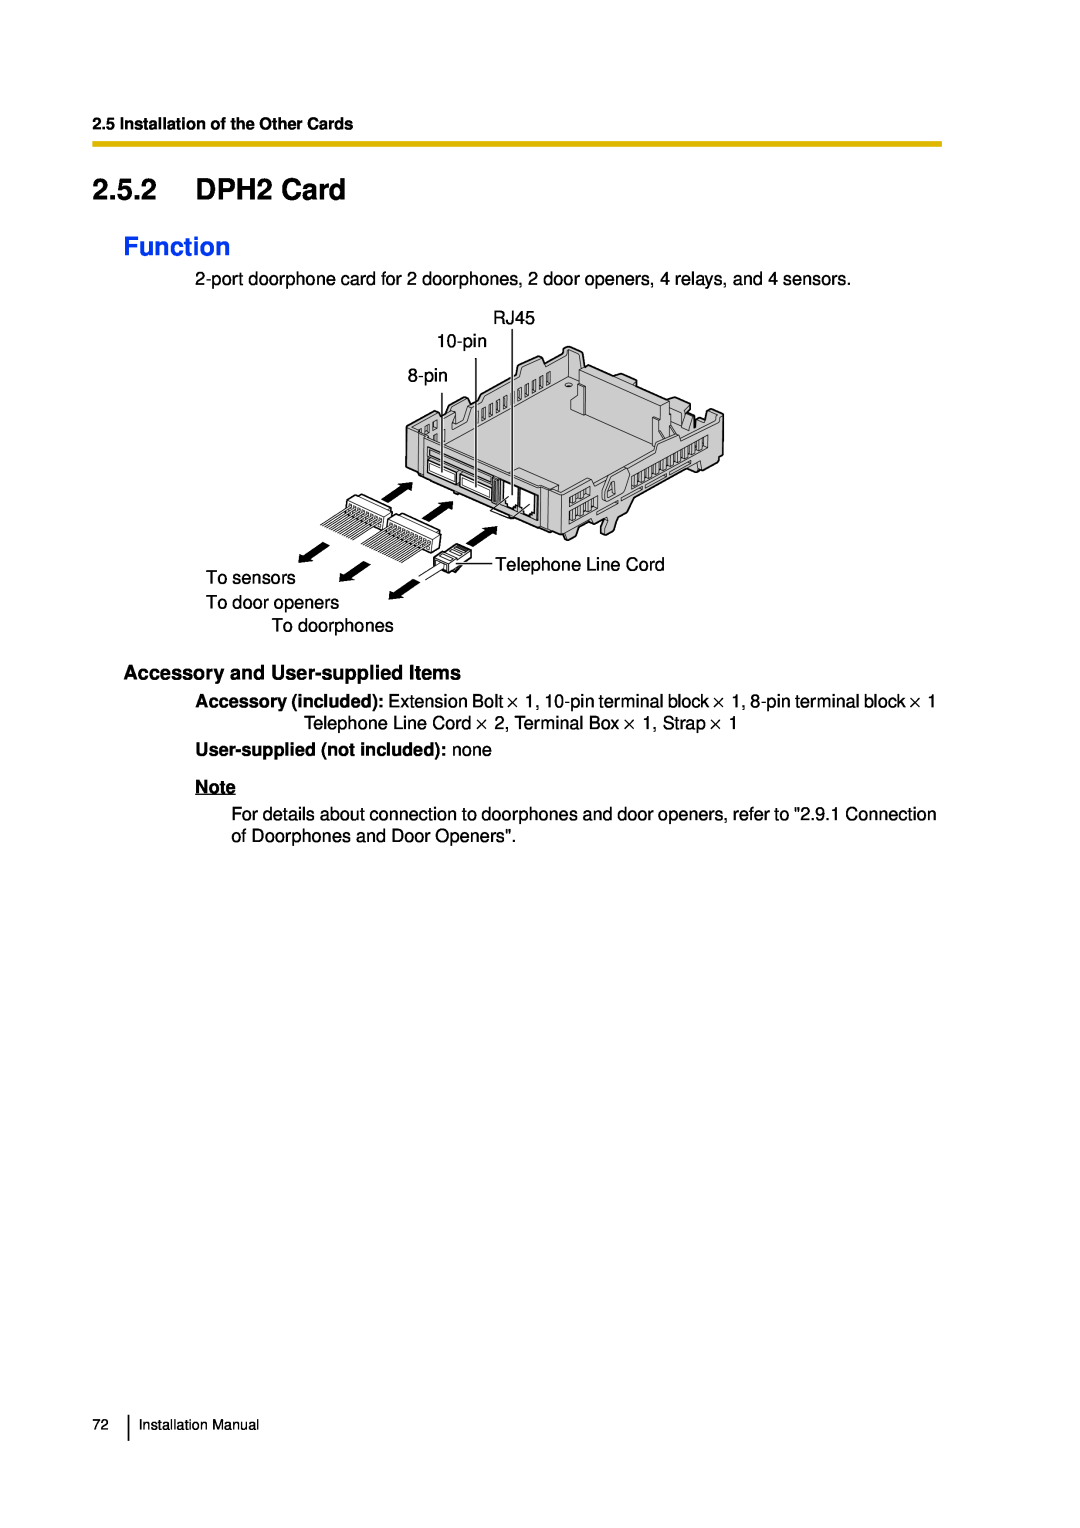 Panasonic KX-TDA30 installation manual 2.5.2DPH2 Card, Function, User-suppliednot included none 